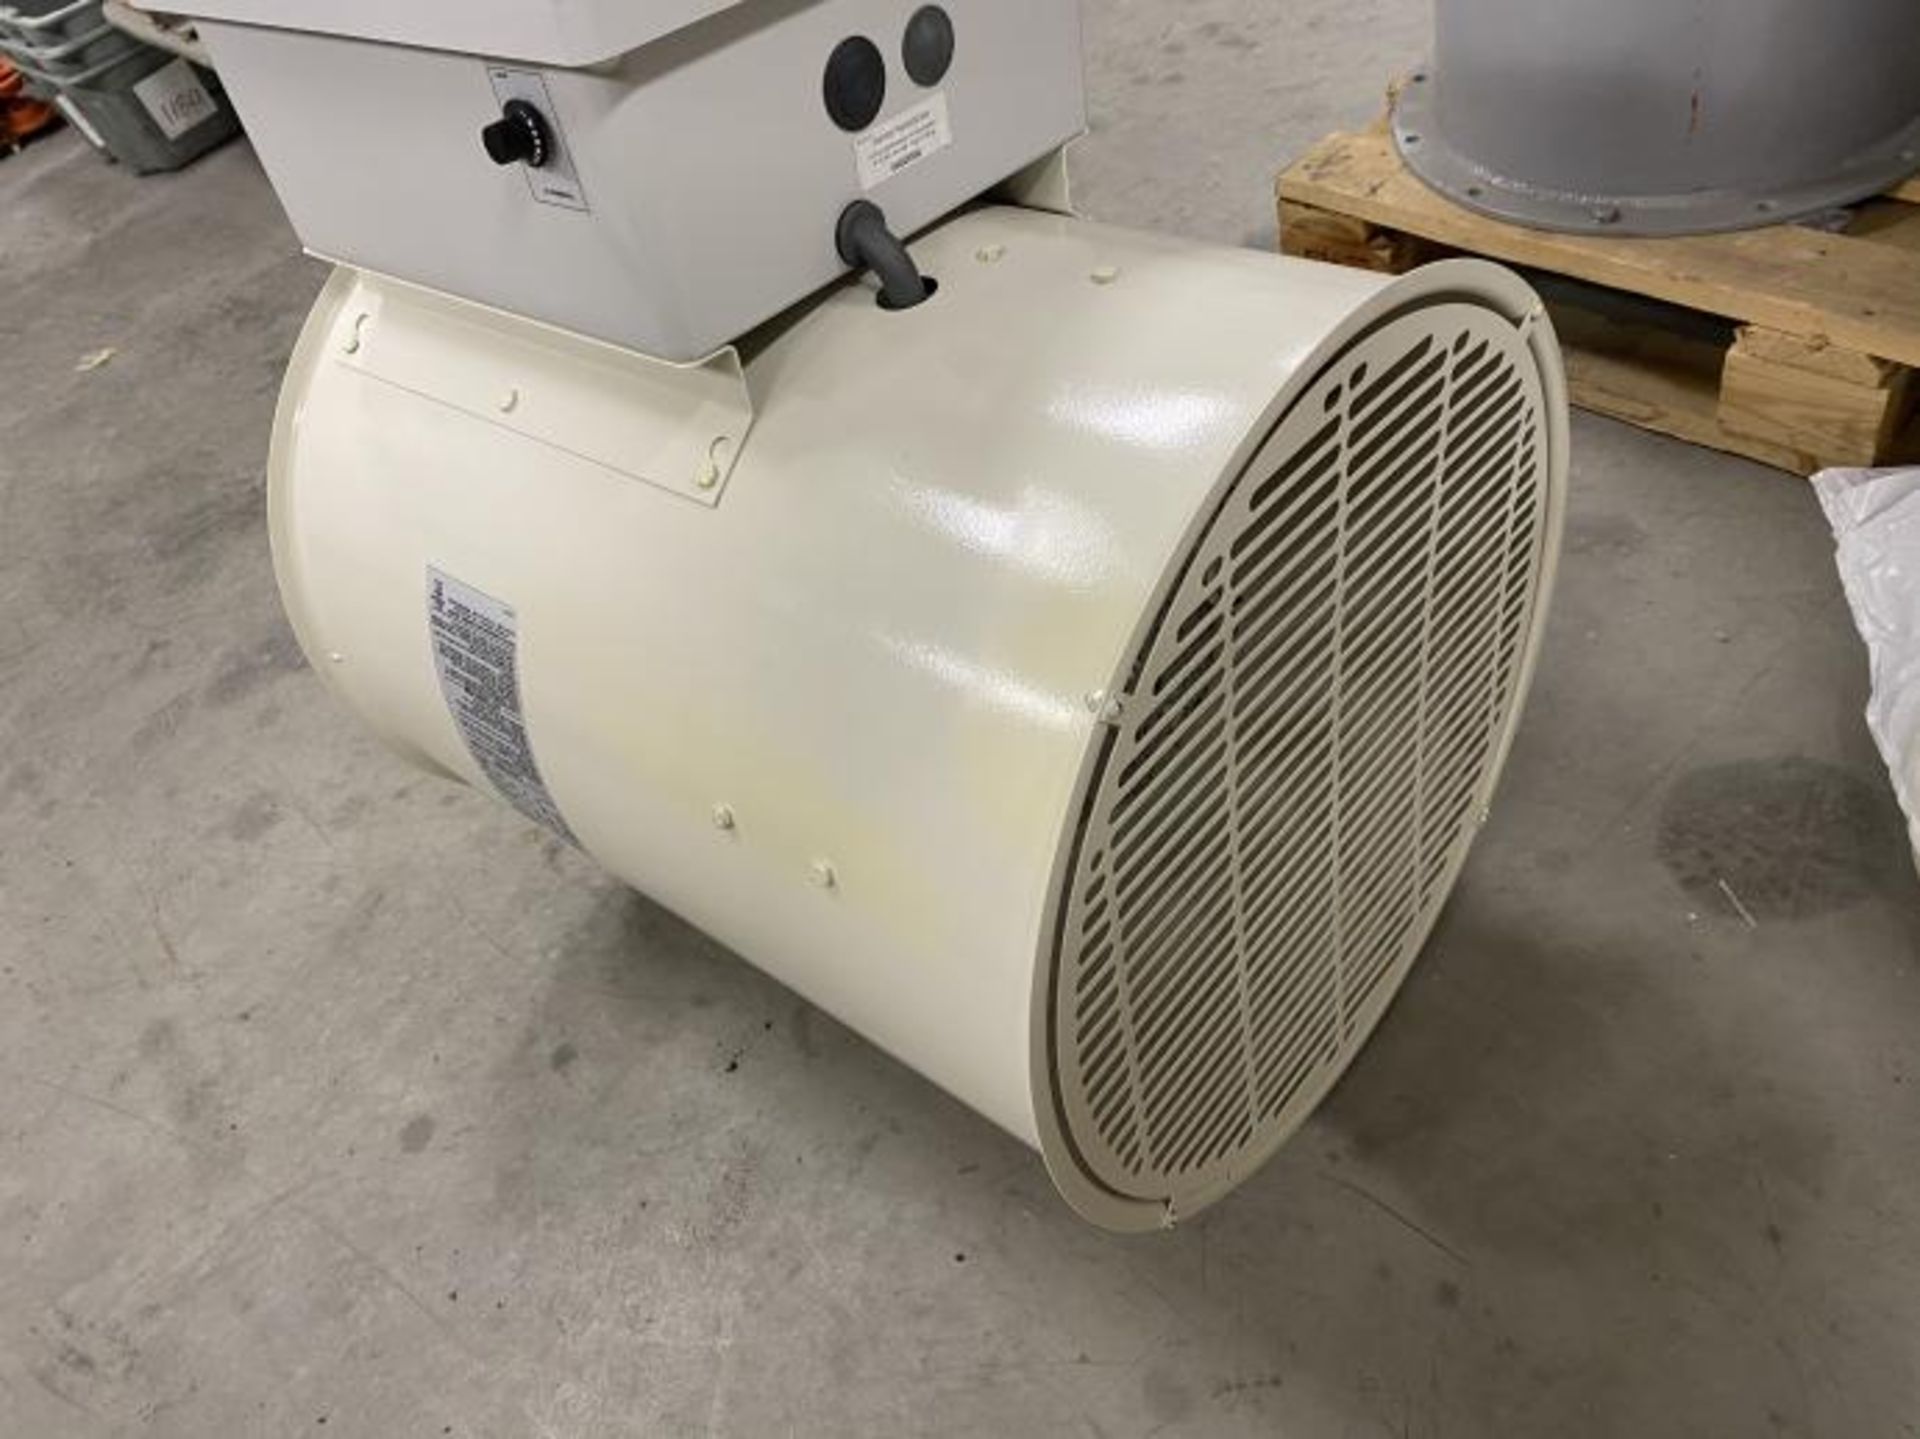 Aerotherme indeeco triad® washdown/corrosion resistant unit heater 30 kw - Image 4 of 4